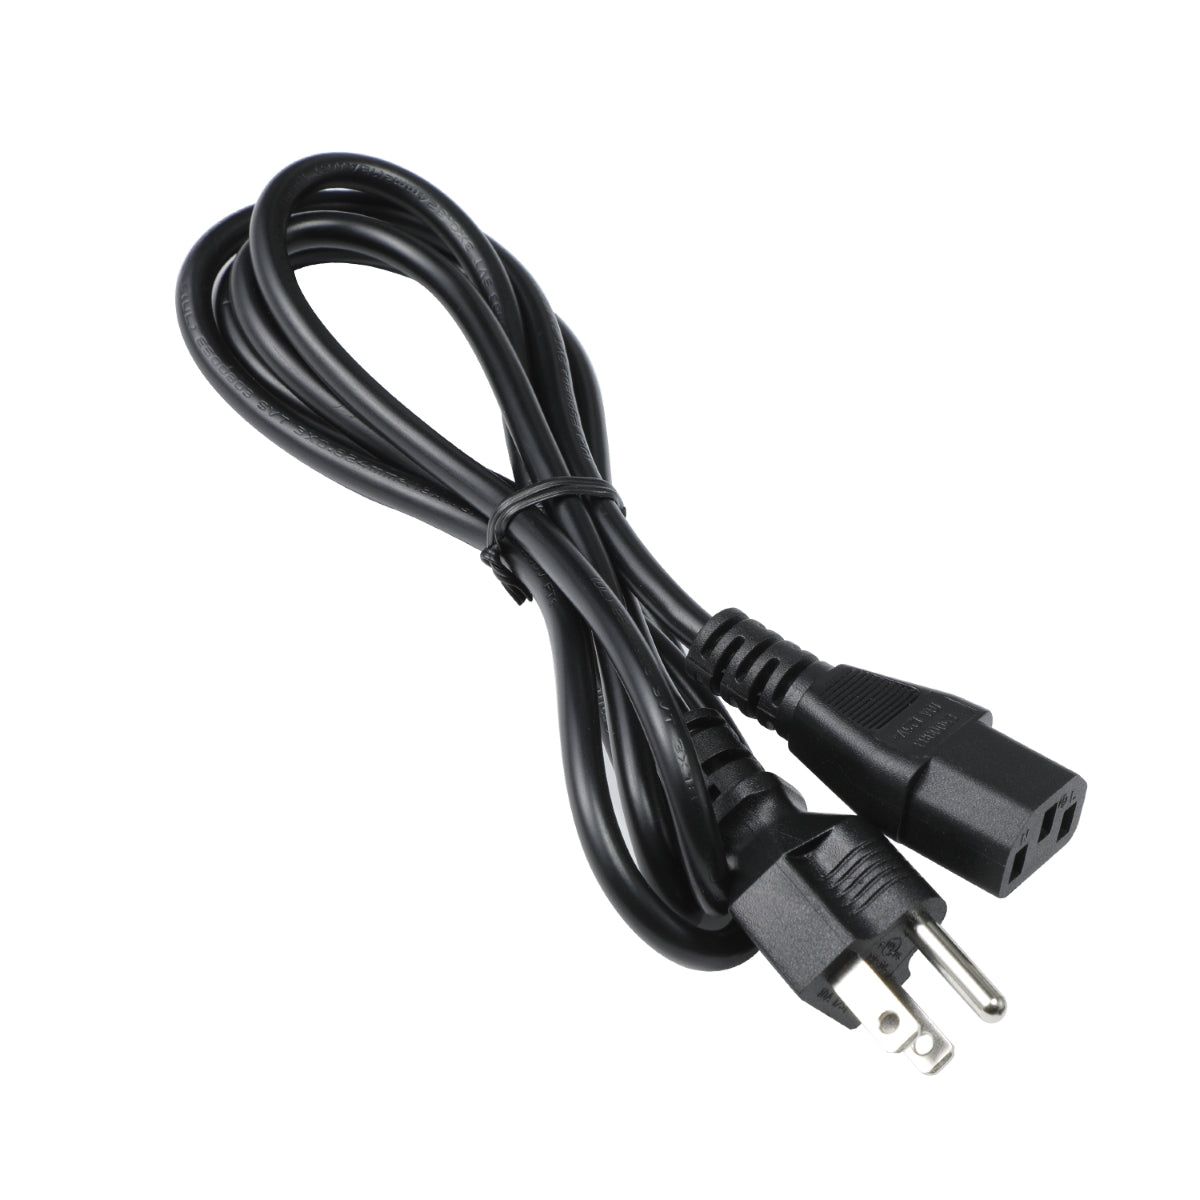 Power Cord for Dell S2817Q Monitor